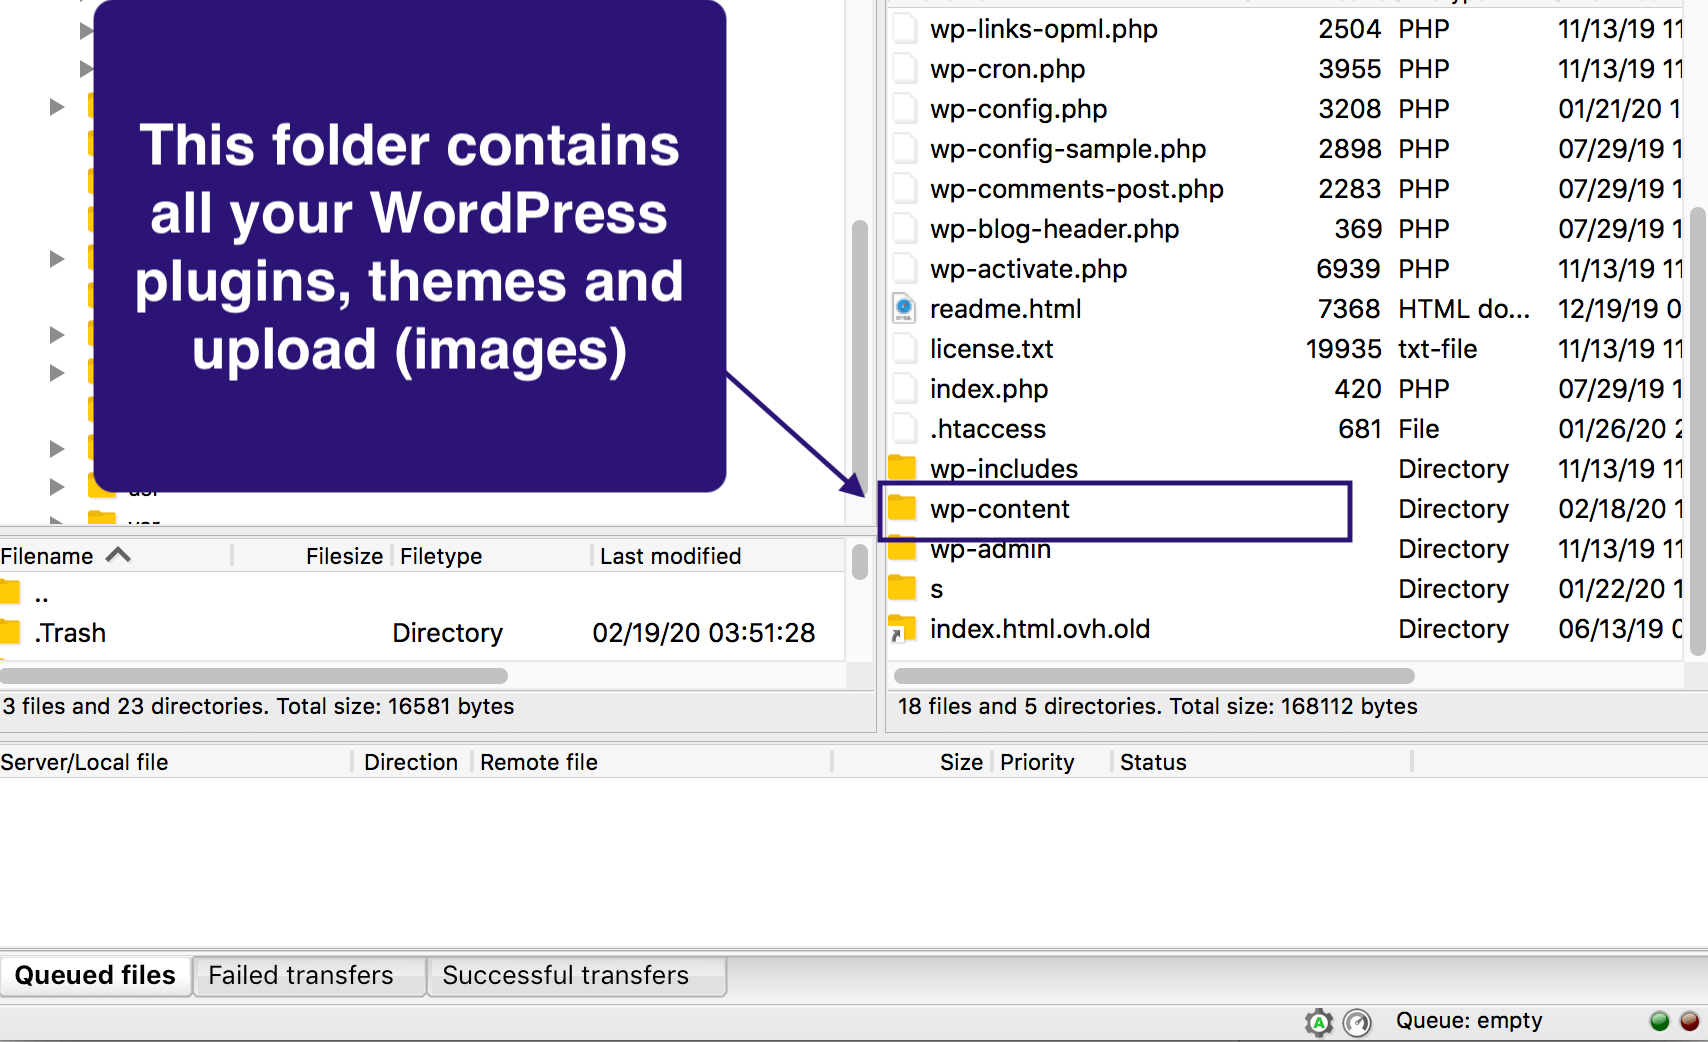 opening the wp-content folder